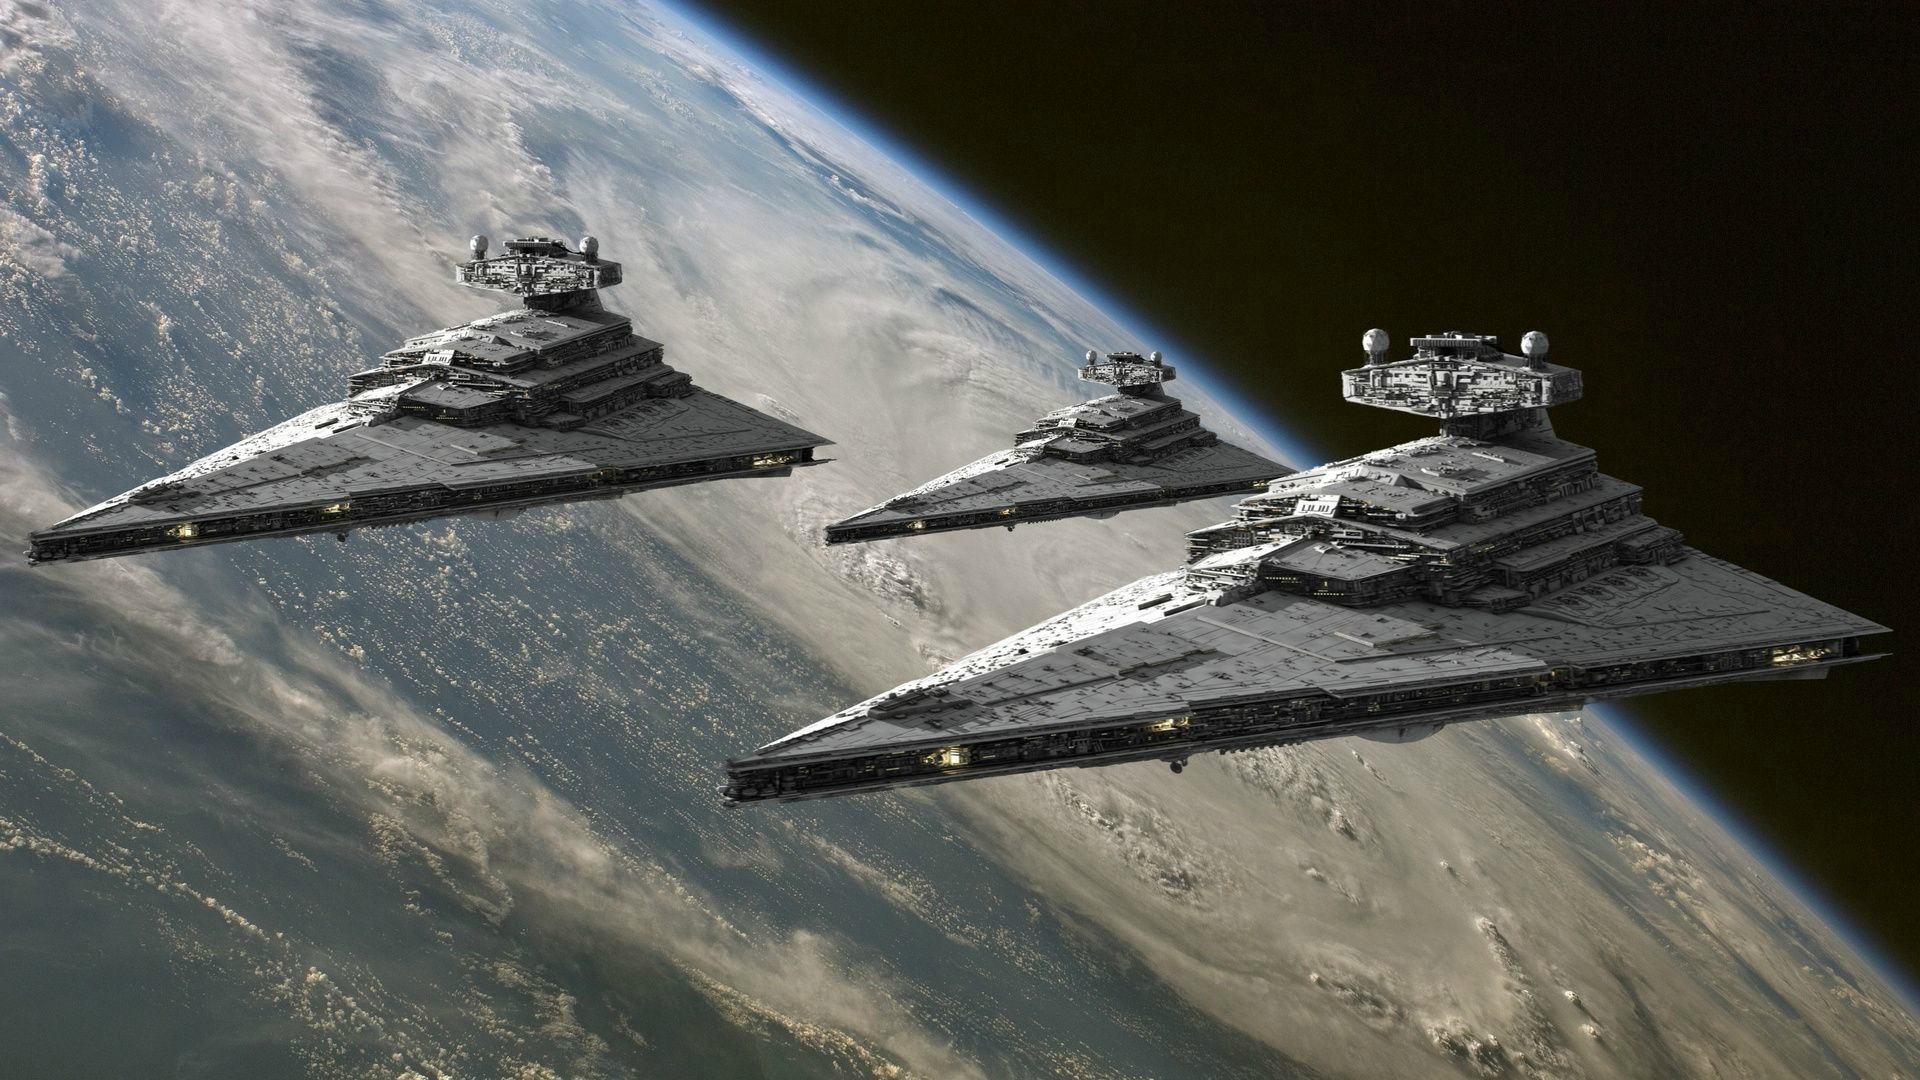 General 1920x1080 Star Wars science fiction Star Destroyer Star Wars Ships Imperial Forces planet space vehicle